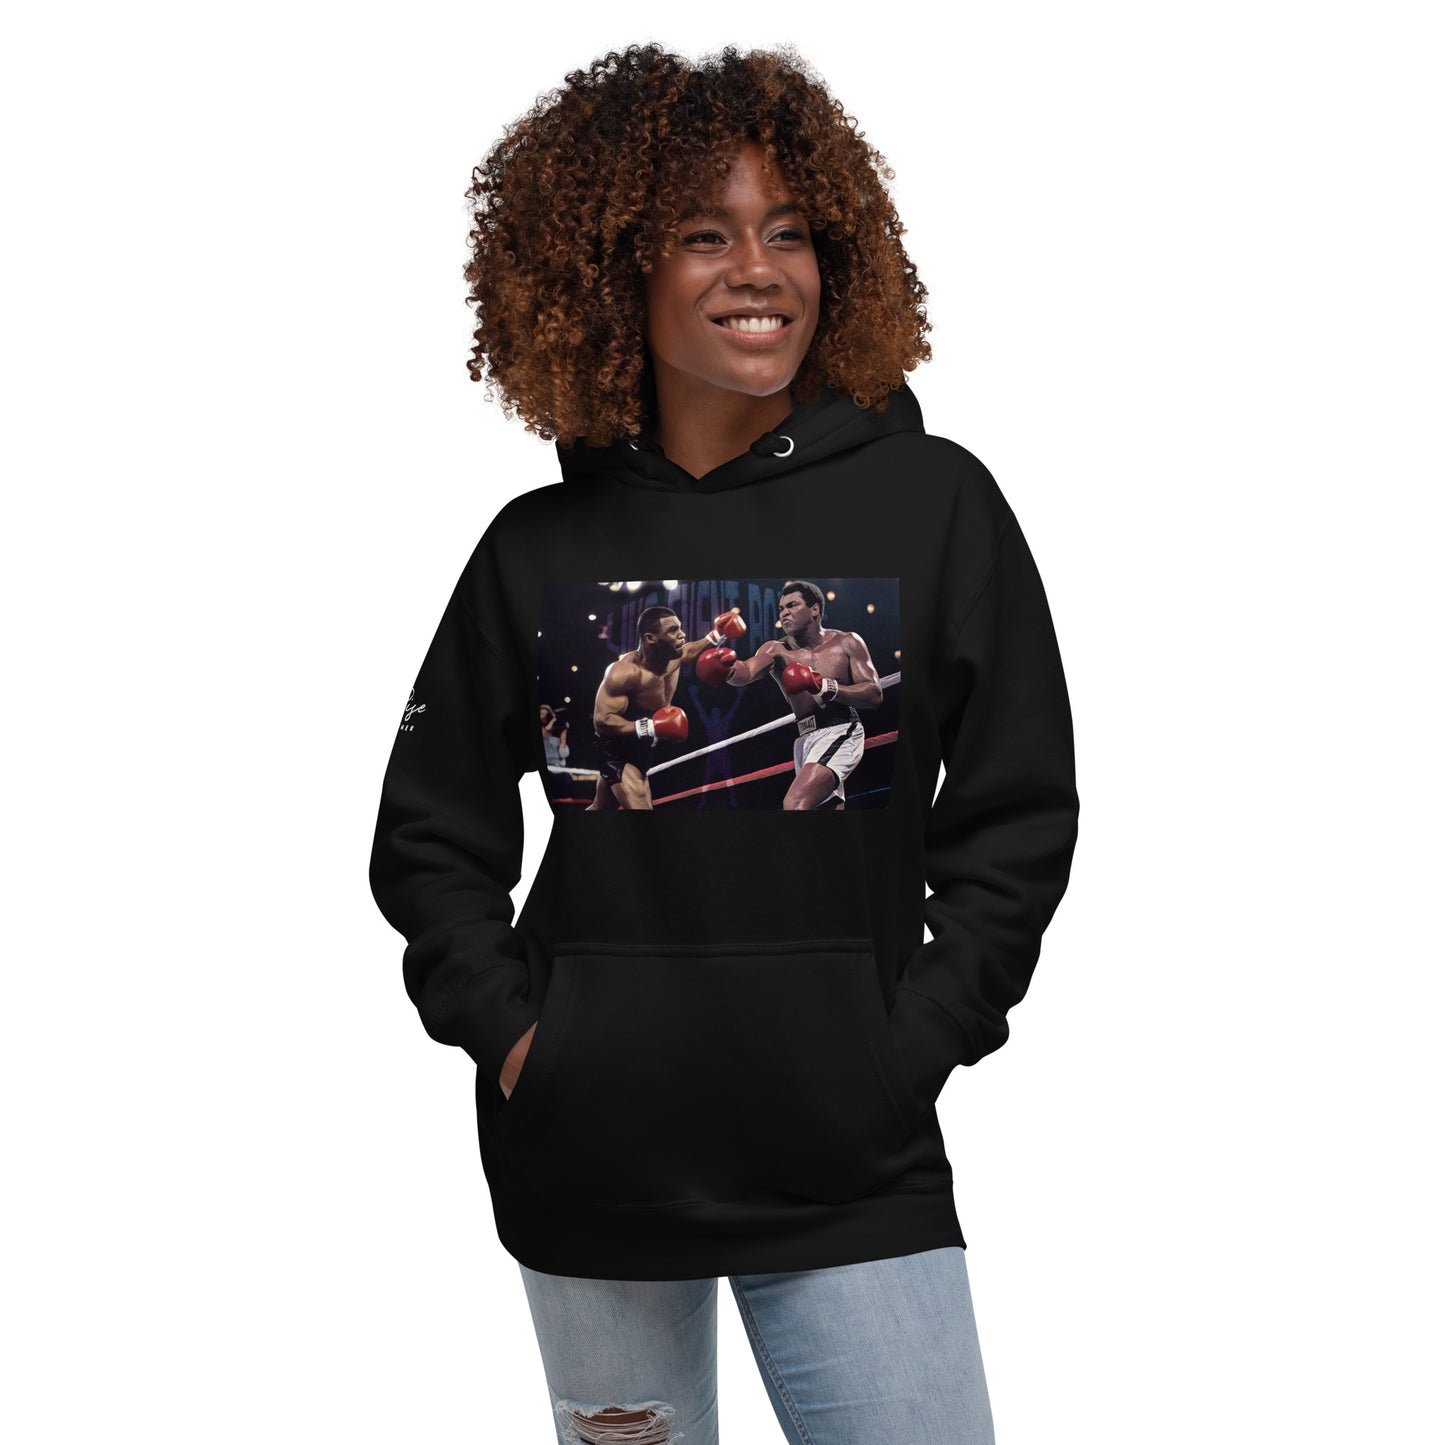 "URise Together" Boxing ICON Hoodie with White Shoulder Logo - Black